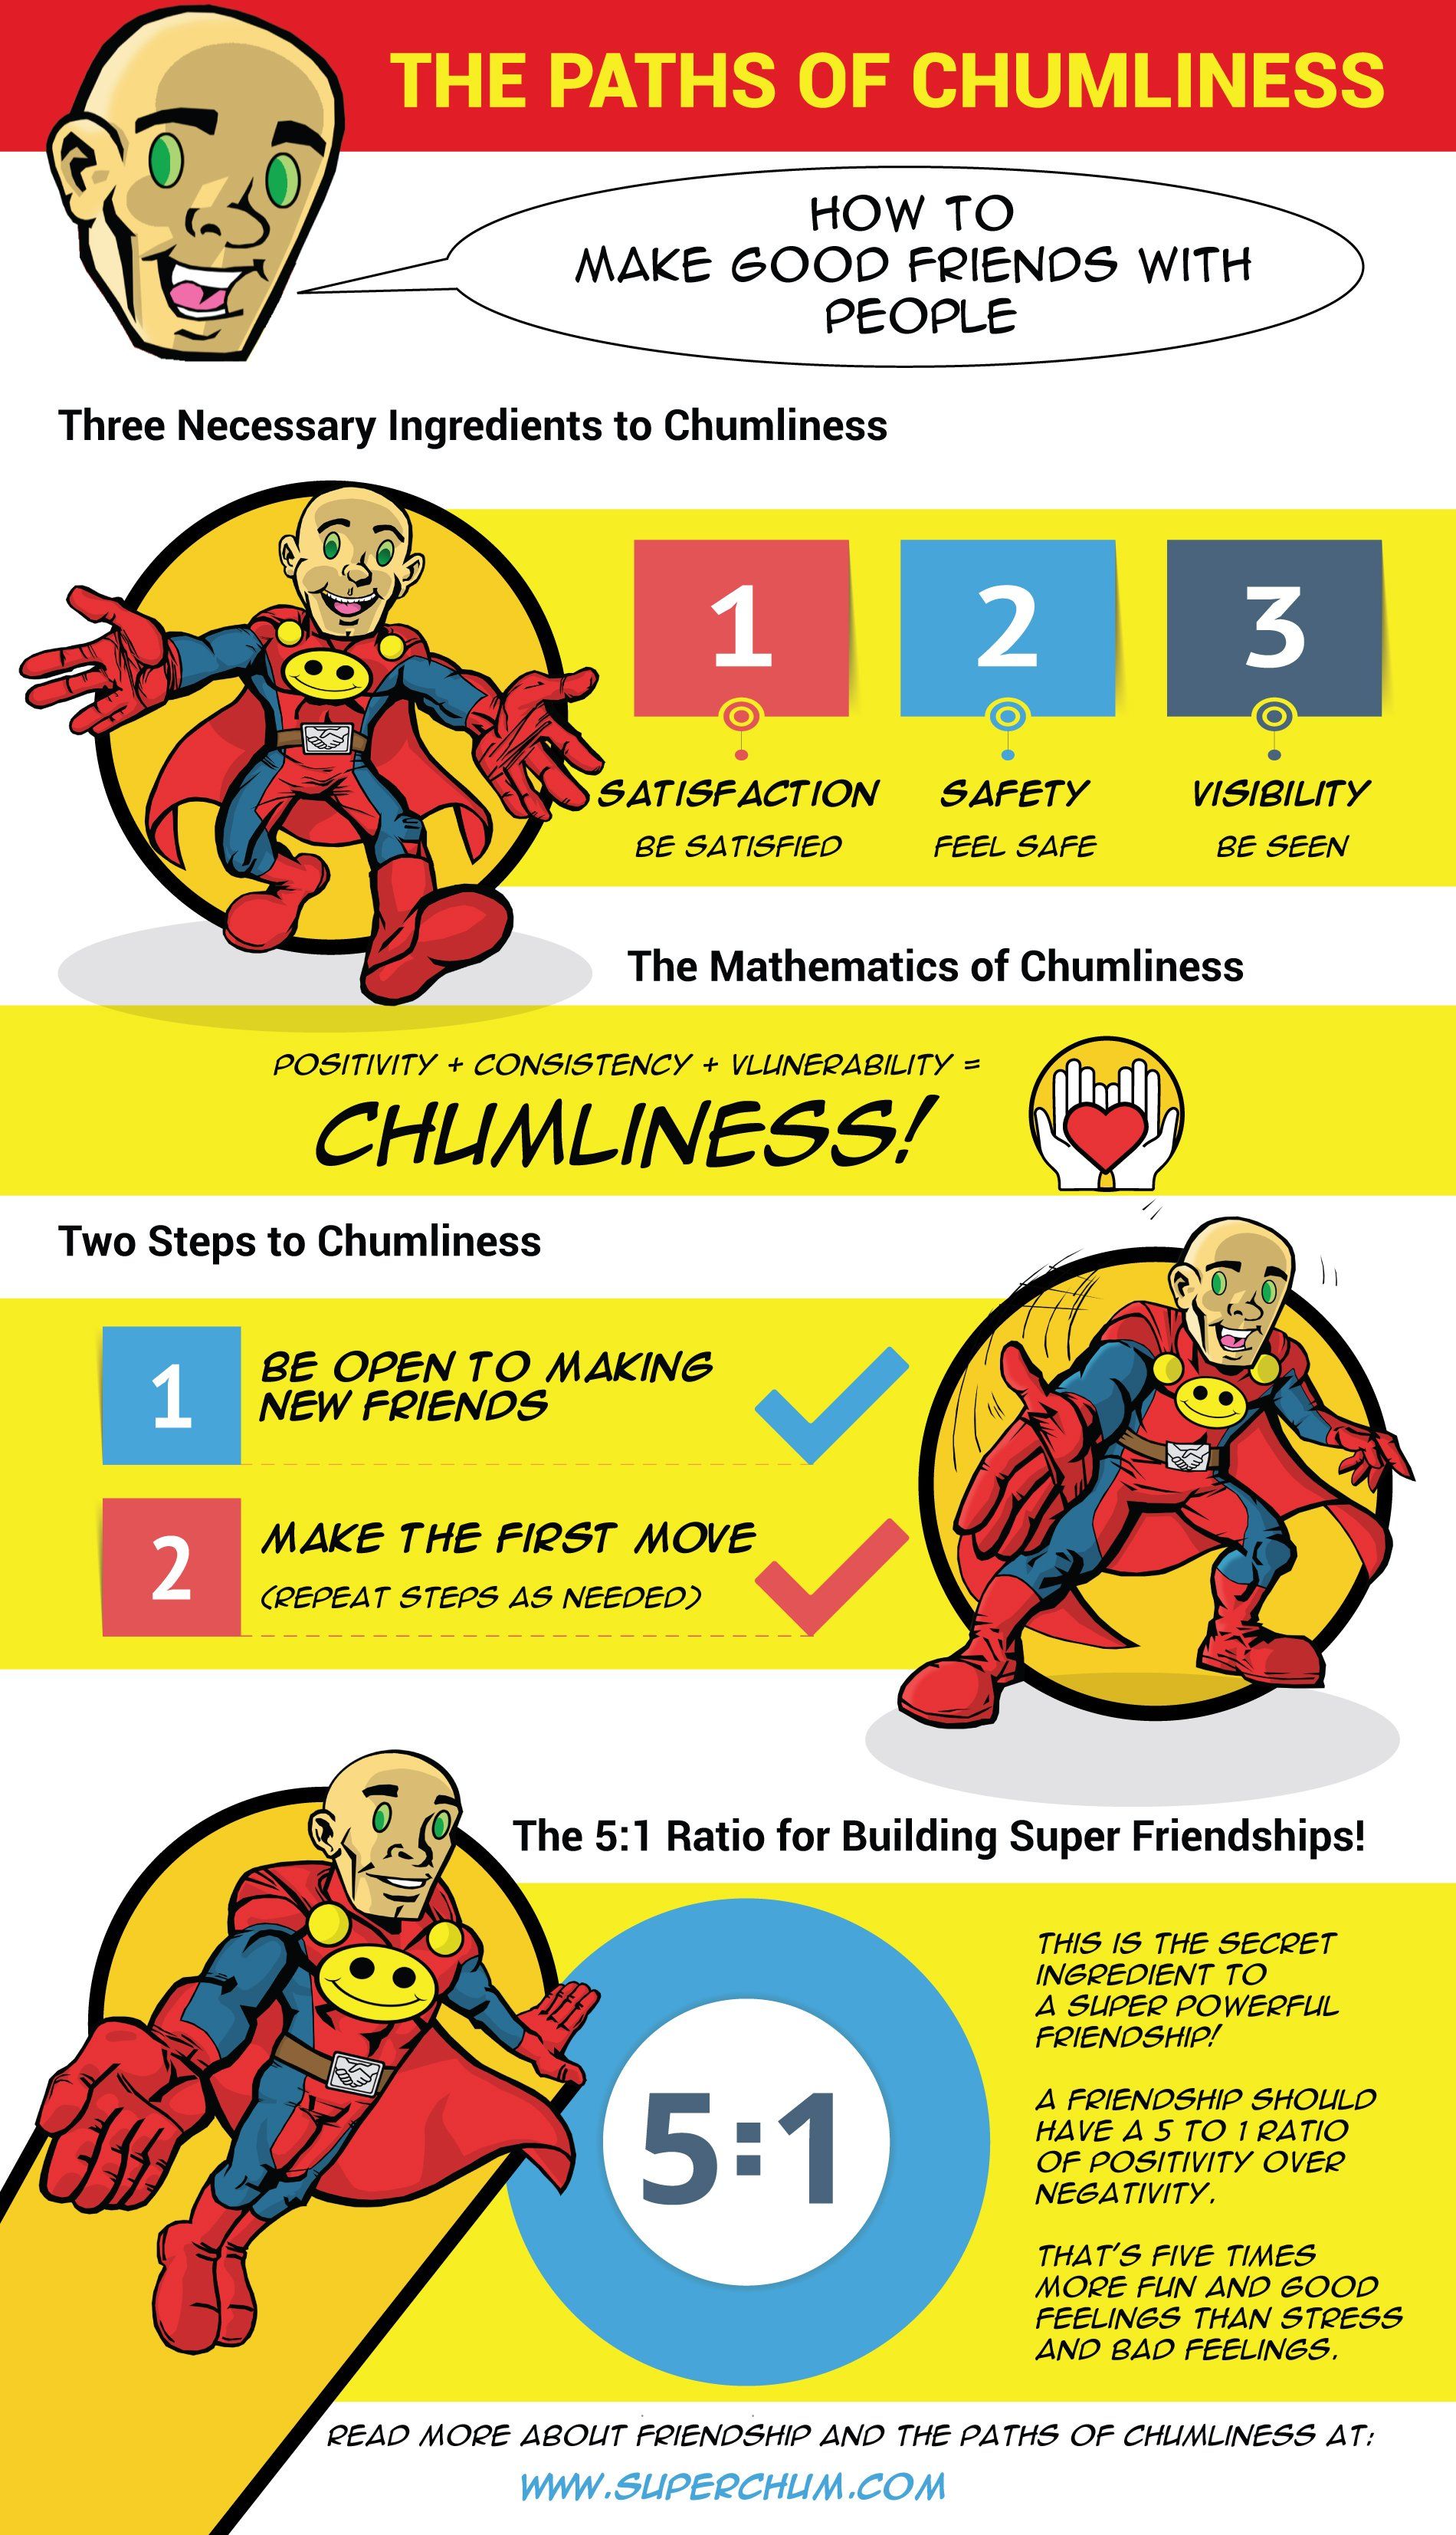 The Paths of Chumliness Infographic: How to Make Good Friends With People